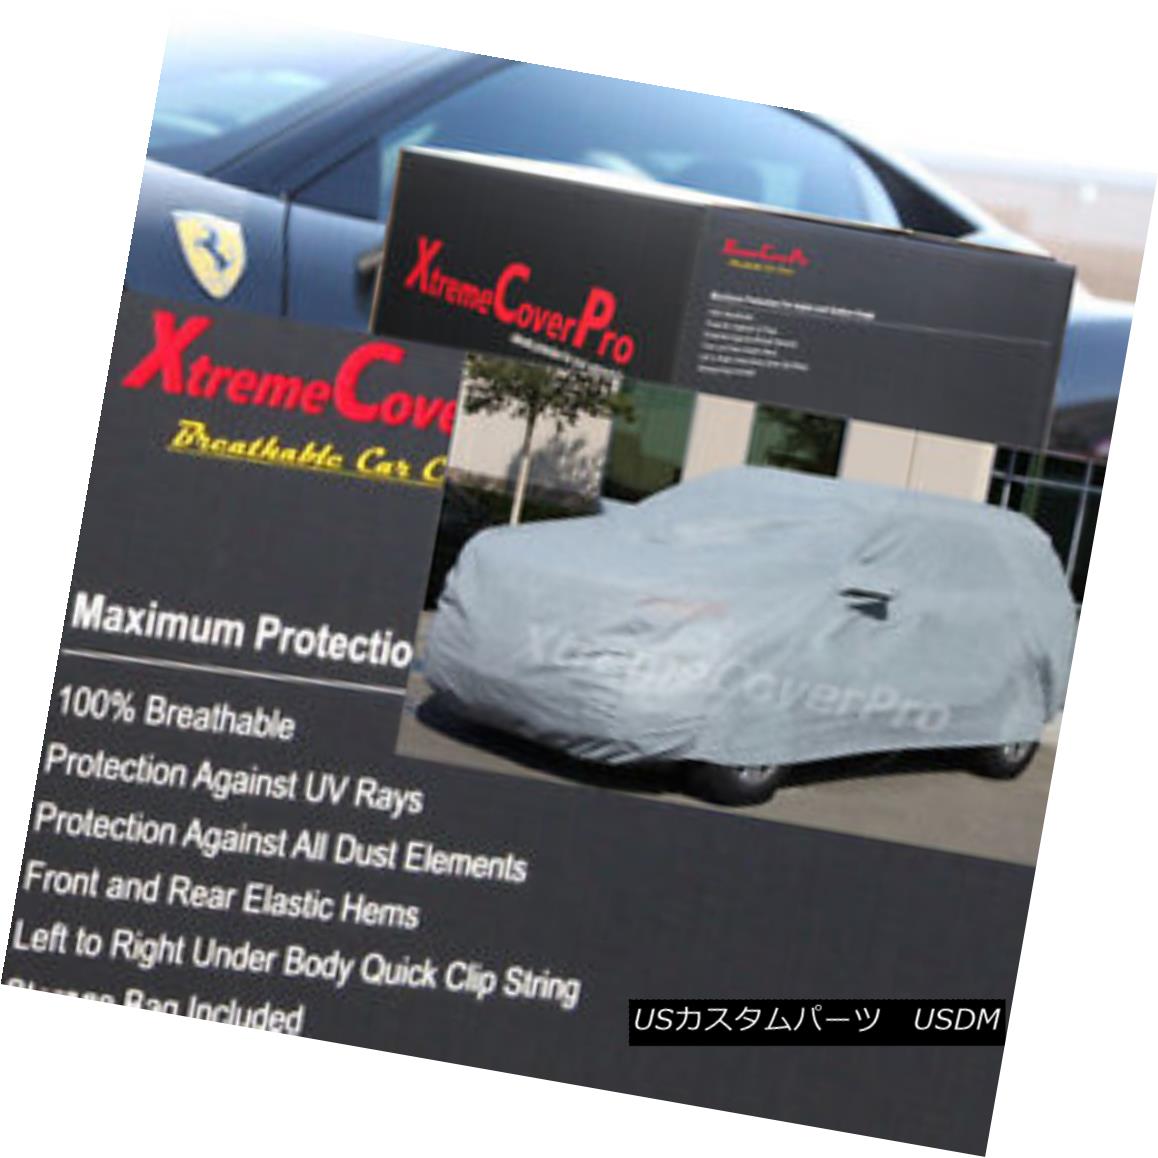 1997 1998 Mercury Mountaineer Breathable Car Cover w MirrorPocket カーカバー 1997 1998 Mercury Mountaineer Breathable Car Cover w MirrorPocket 1997年1998年マーキュリーマウンテニア通気性車カバー付きMirrorPocket